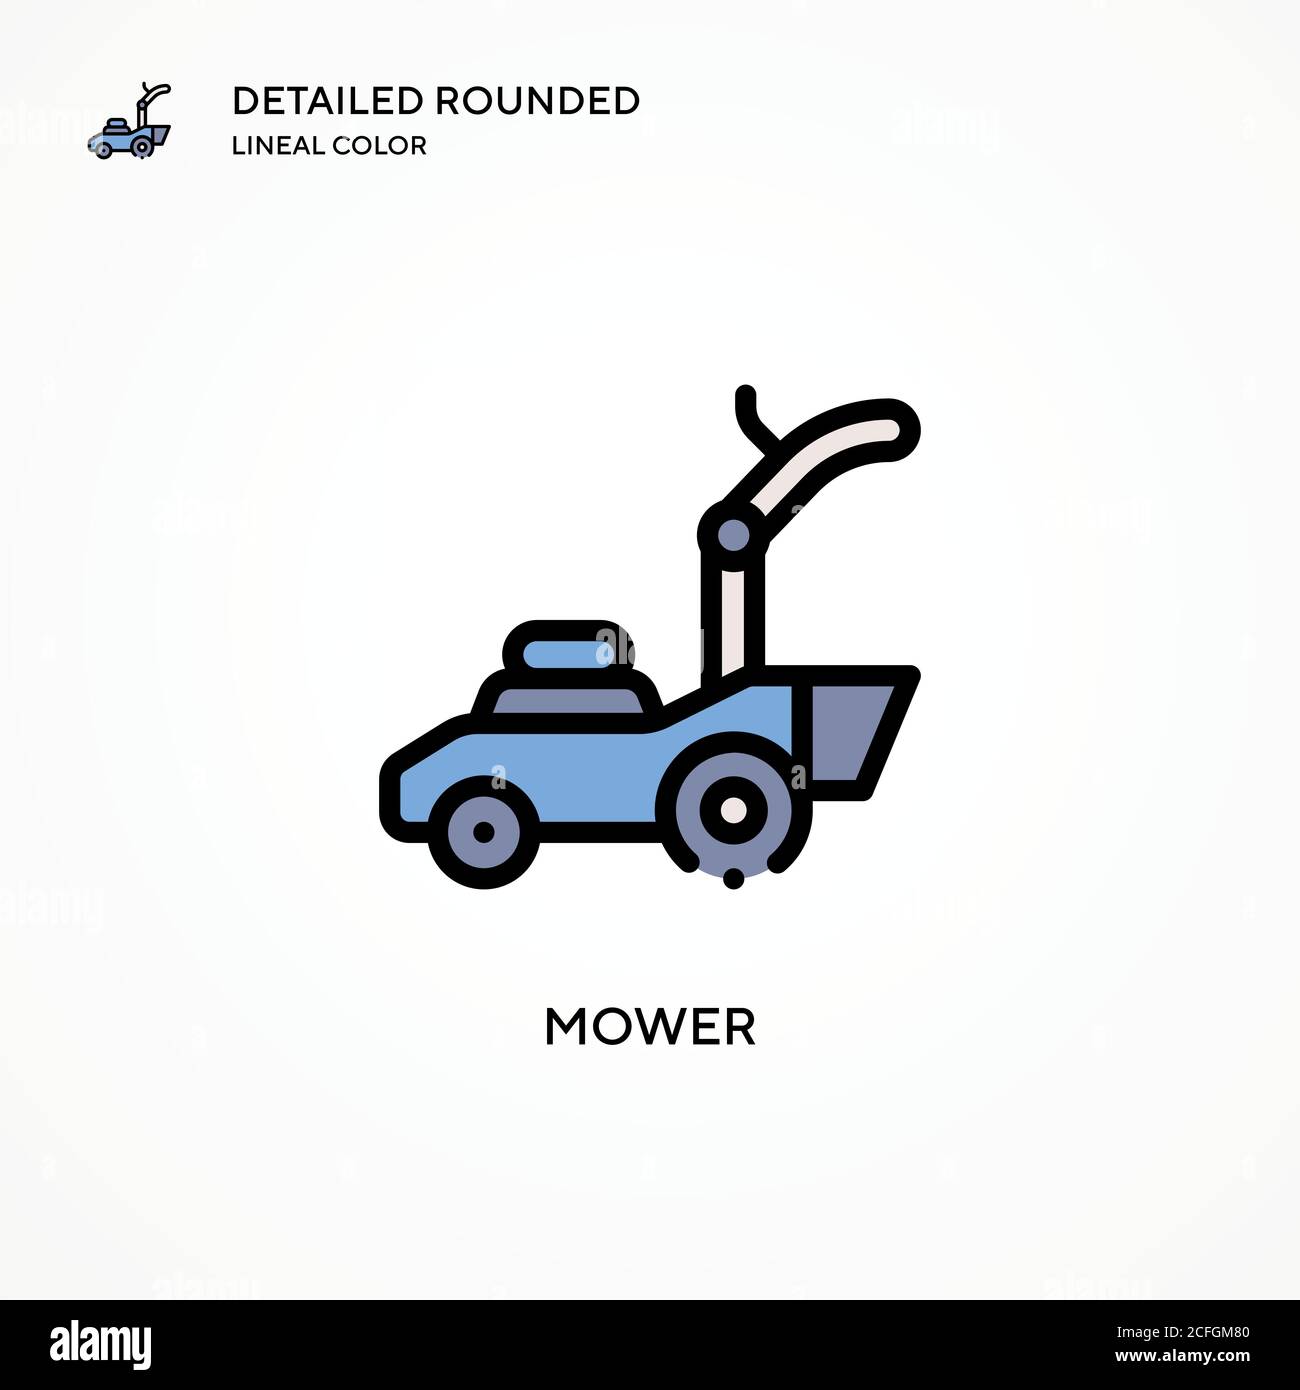 Mower vector icon. Modern vector illustration concepts. Easy to edit and customize. Stock Vector